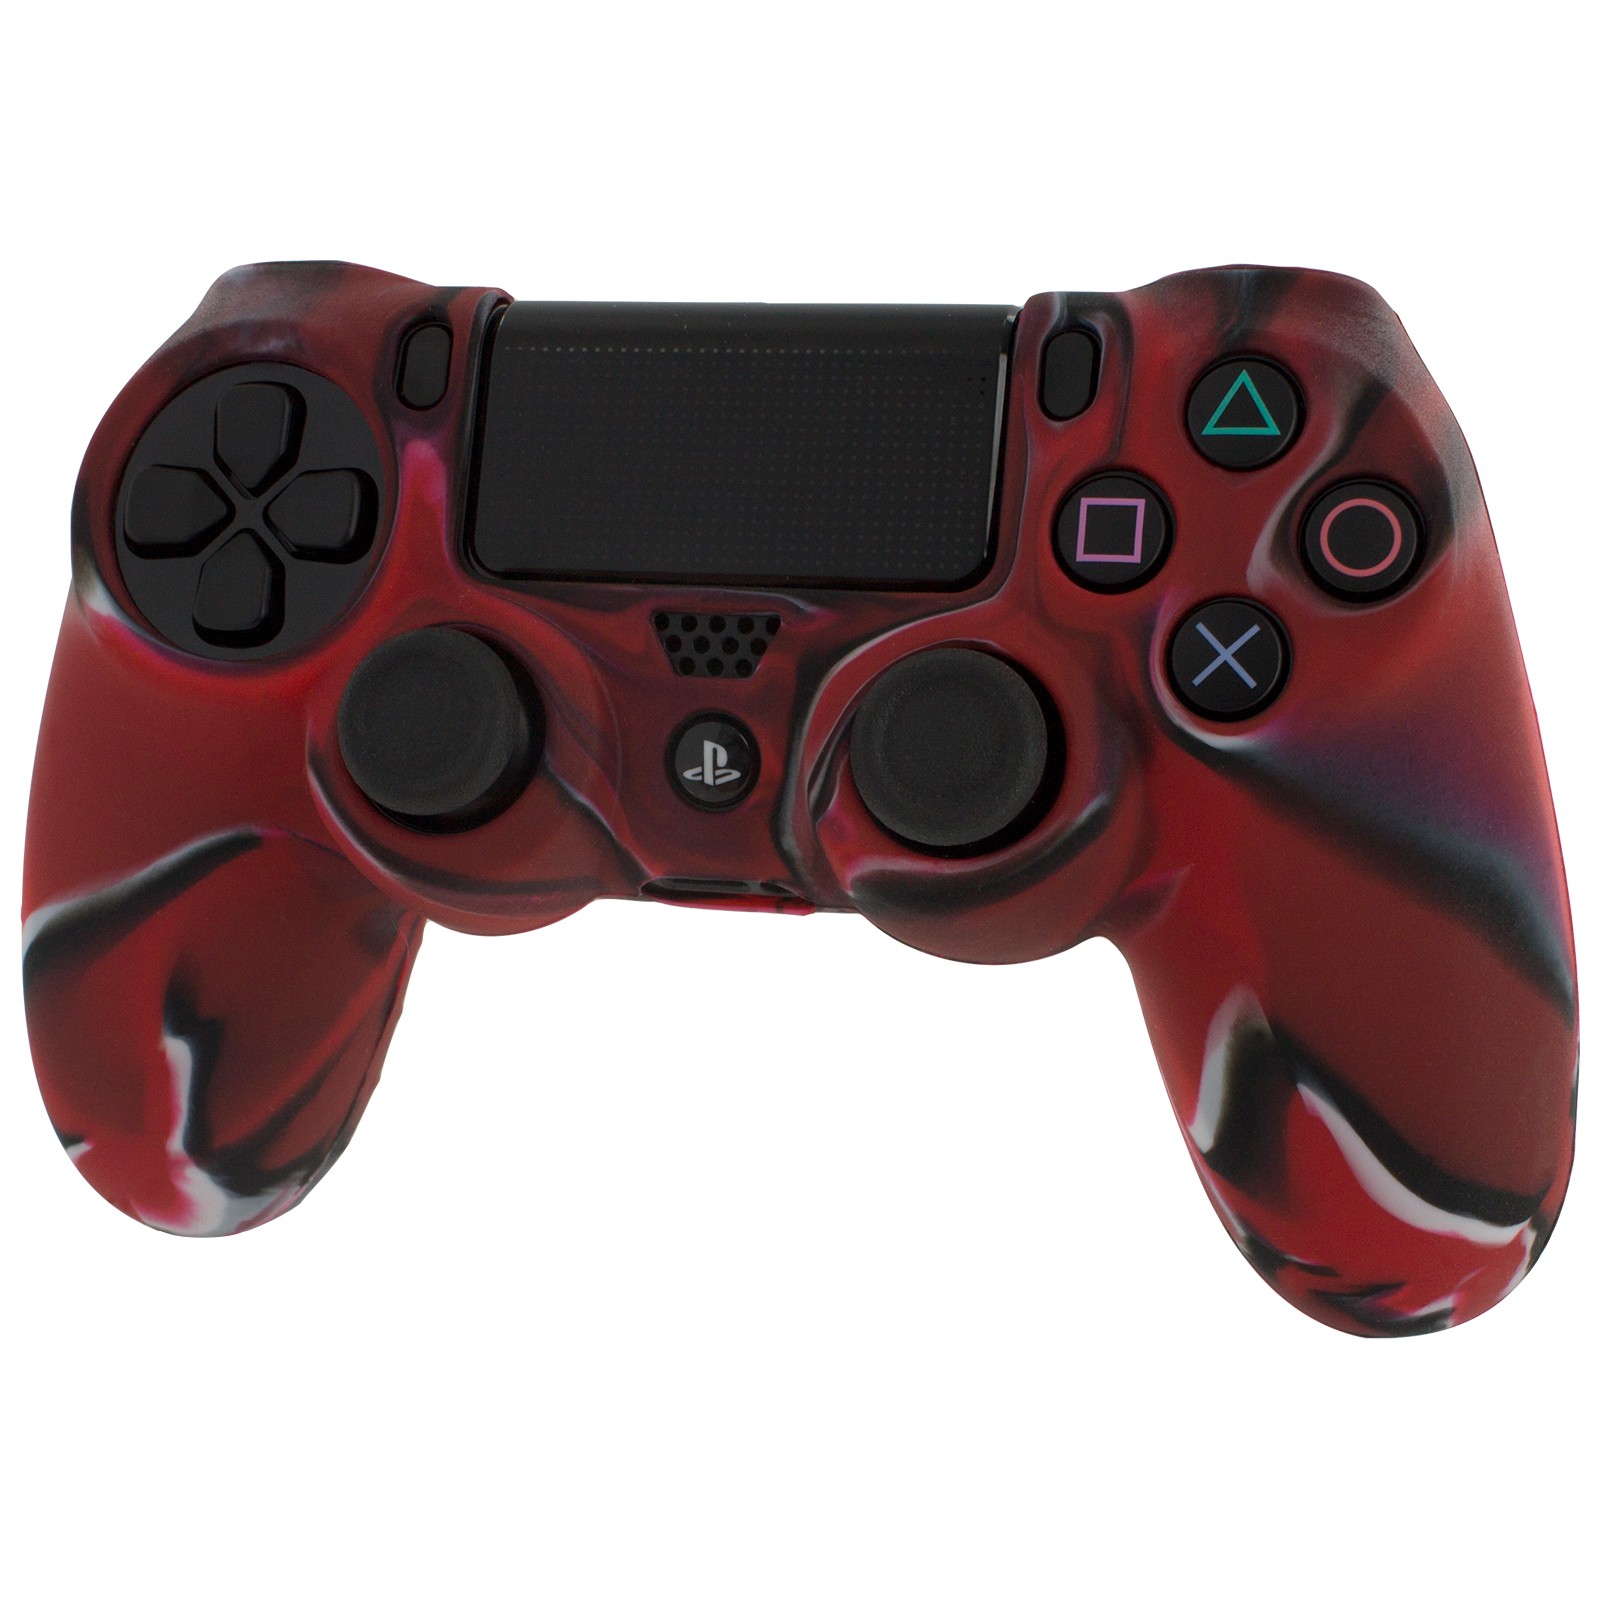 Kop Zedlabz Soft Silicone Rubber Skin Grip Cover For Sony Ps4 Controller With Ribbed Handle Camo Red